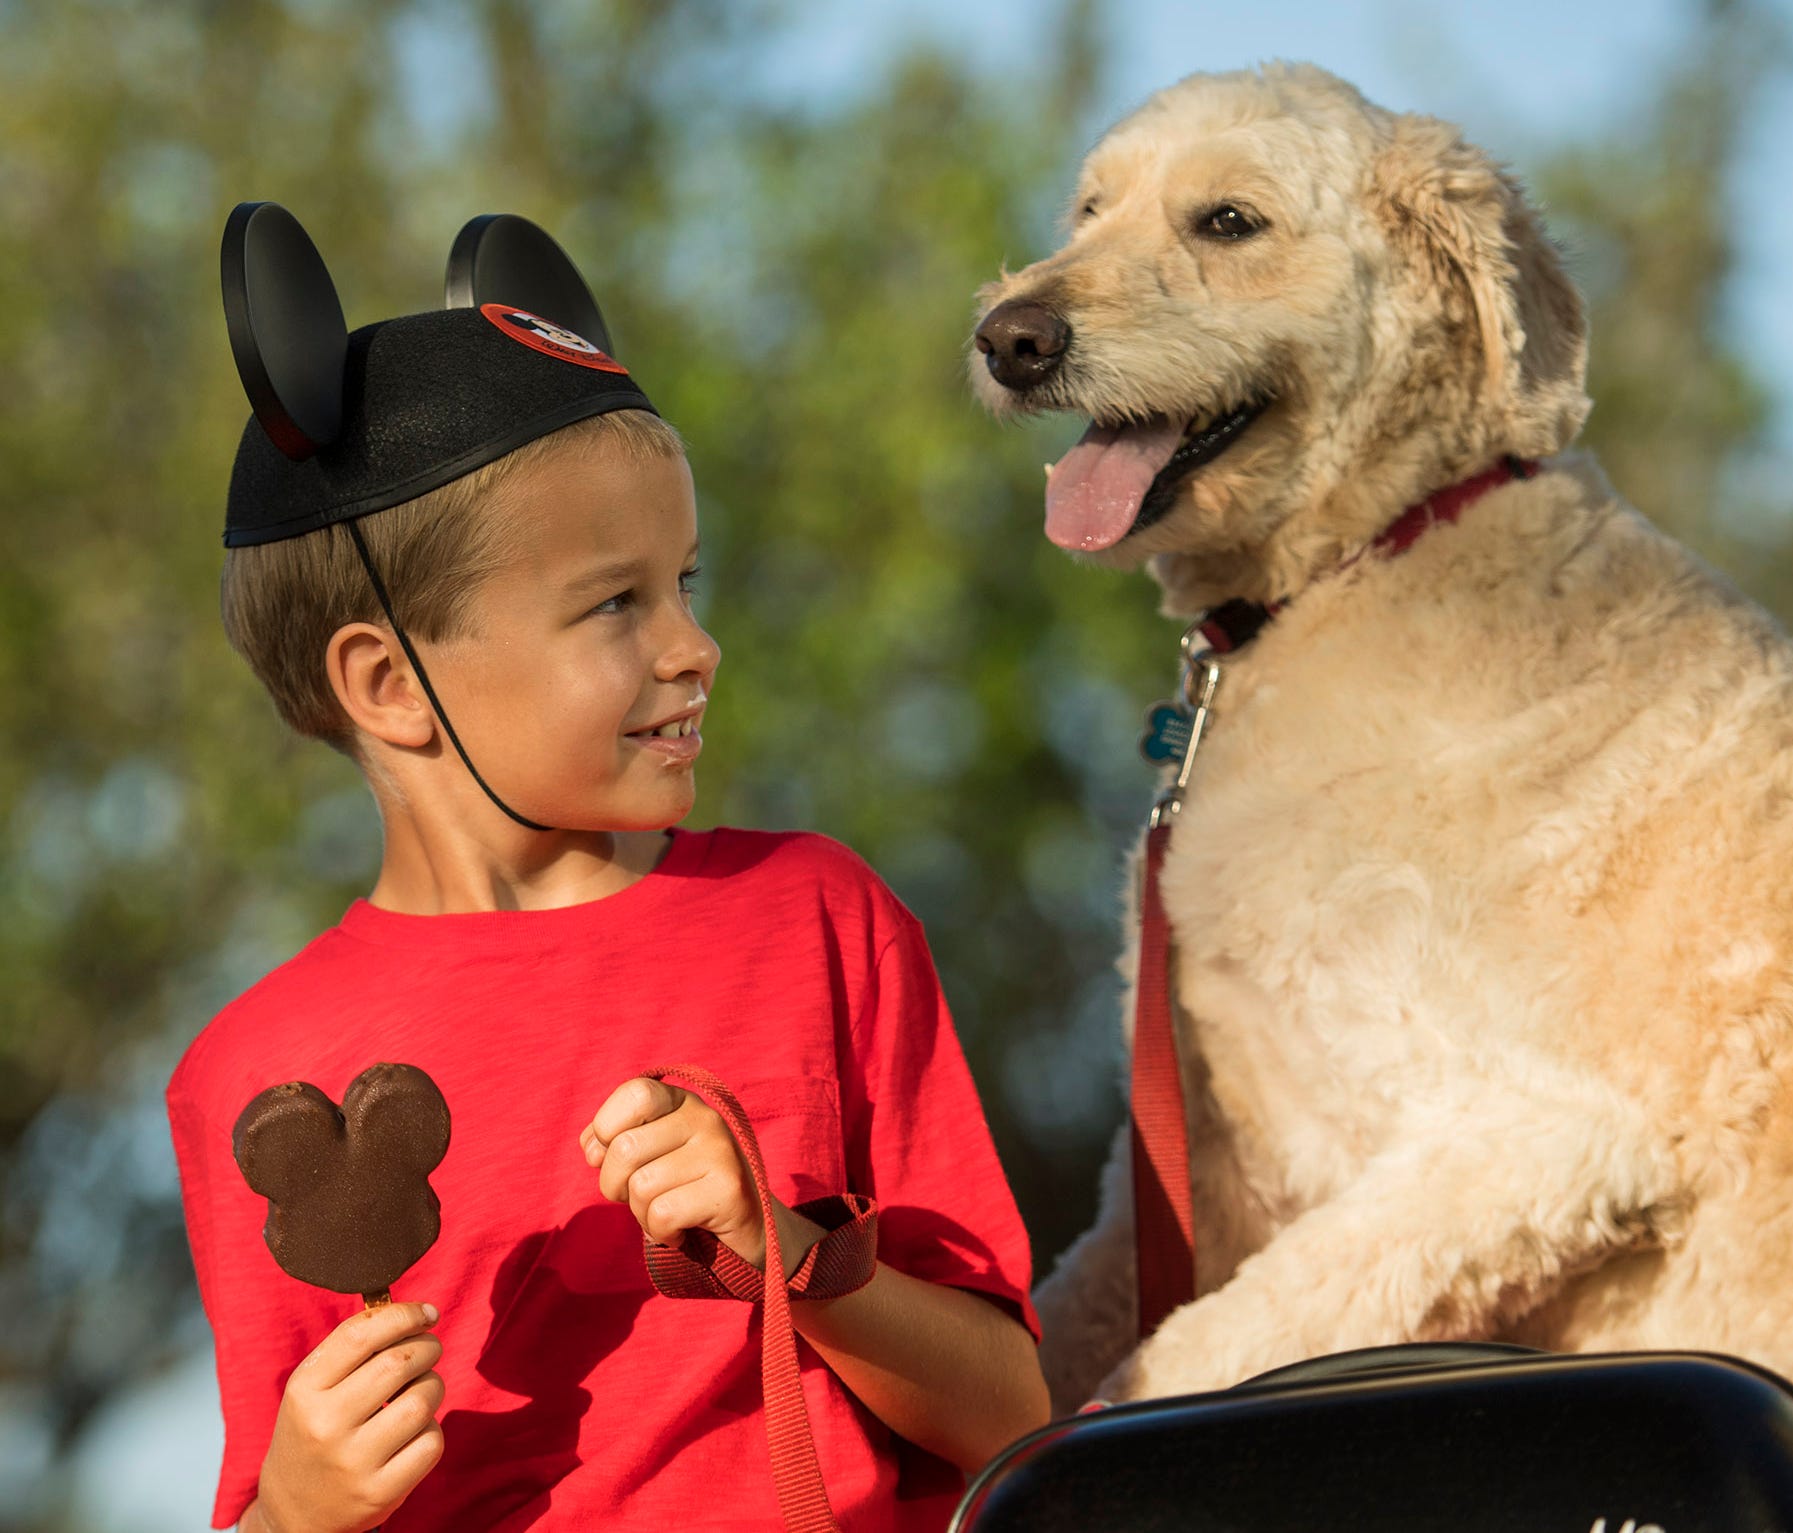 Walt Disney World Resort now welcomes guests and their dogs to four select properties.